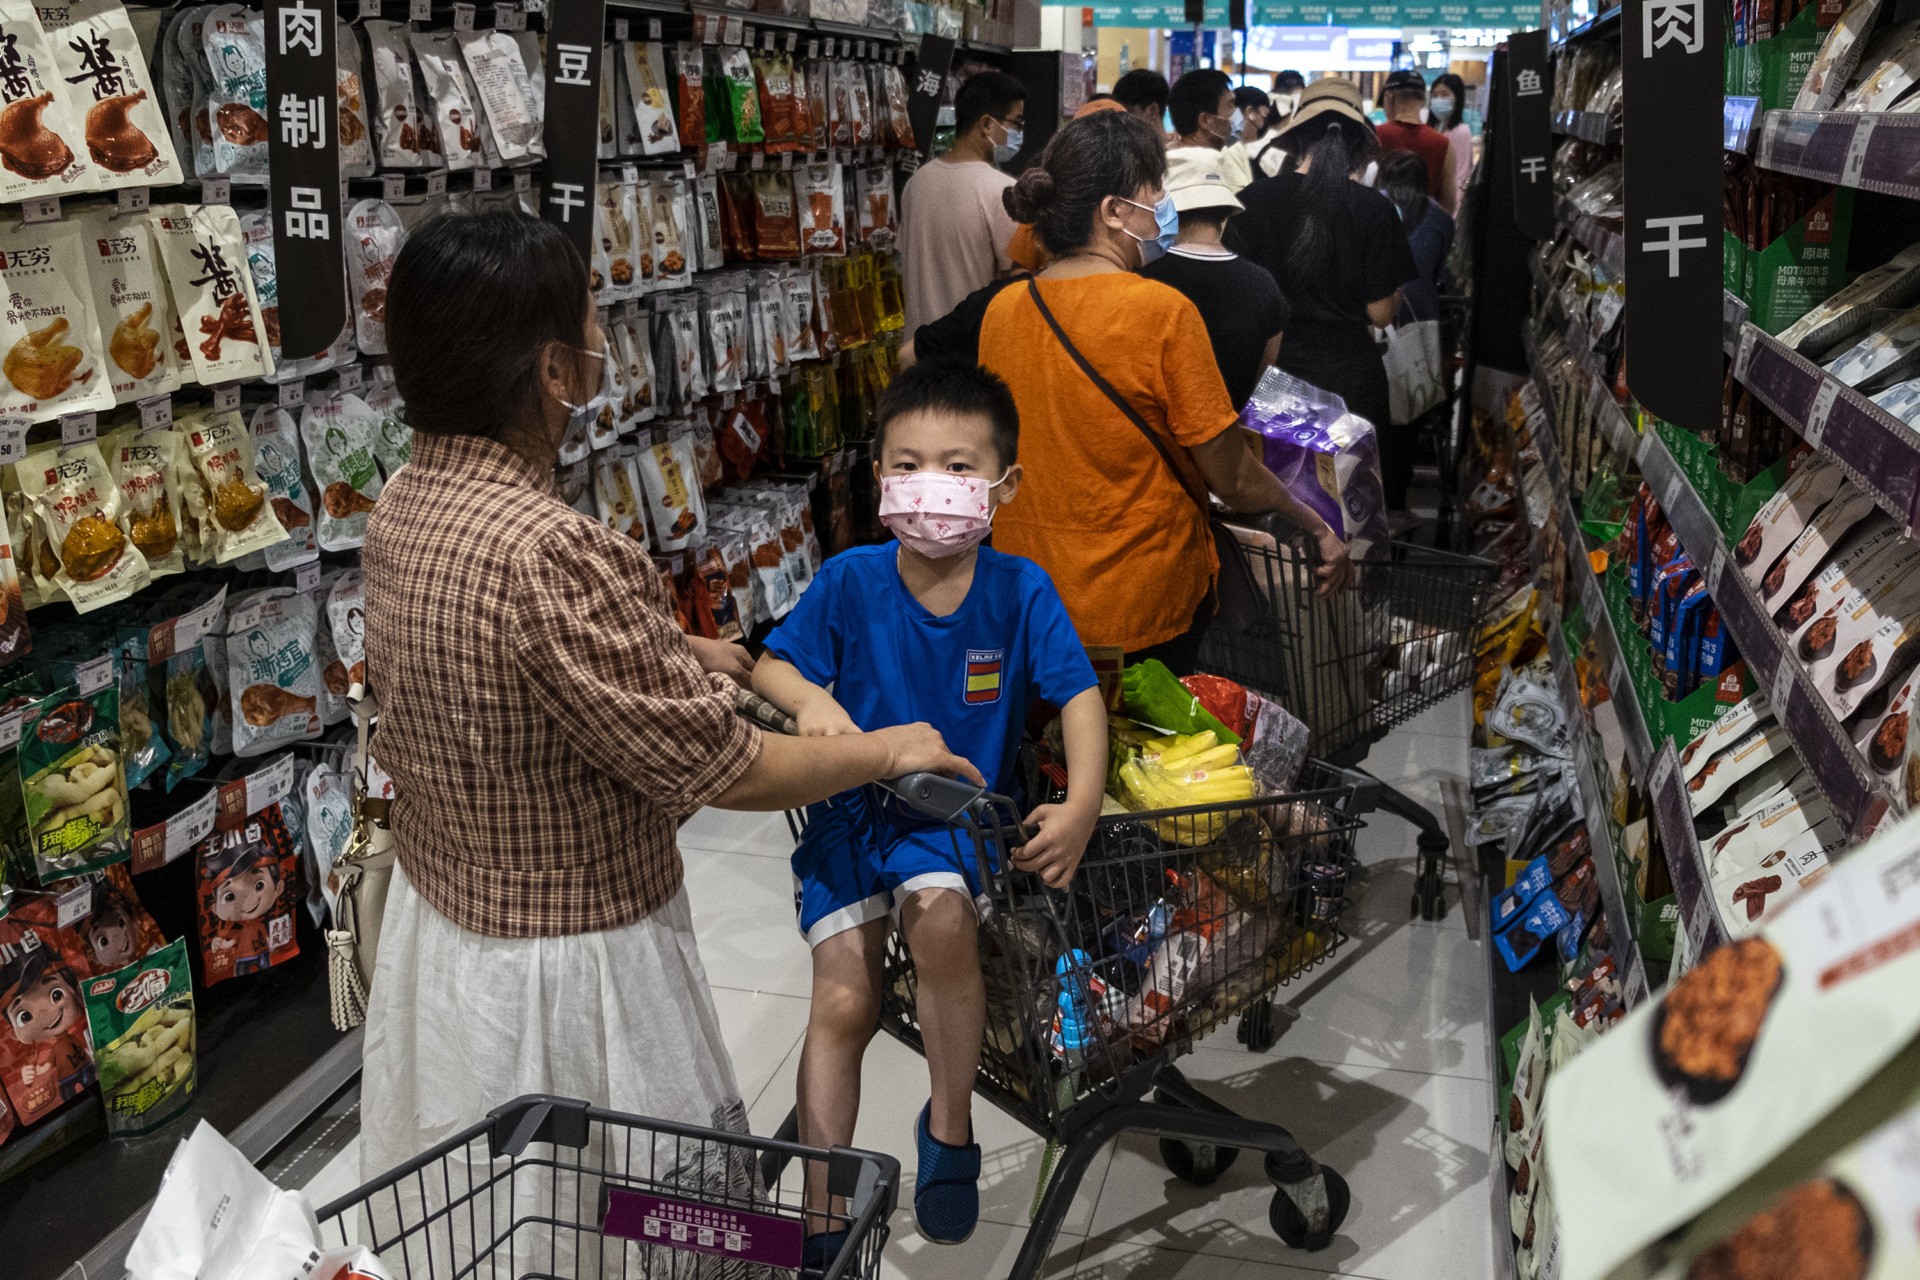 WUHAN, CHINA - AUGUST 2：(CHINA OUT) People wear protective masks as they line up to pay in a supermarket on August 2, 2021 in Wuhan, Hubei Province, China. According to media reports, seven migrant workers returned positive COVID-19 nucleic acid tests. Wuhan has not reported locally transmitted cases for over a year. (Photo by Getty Images)